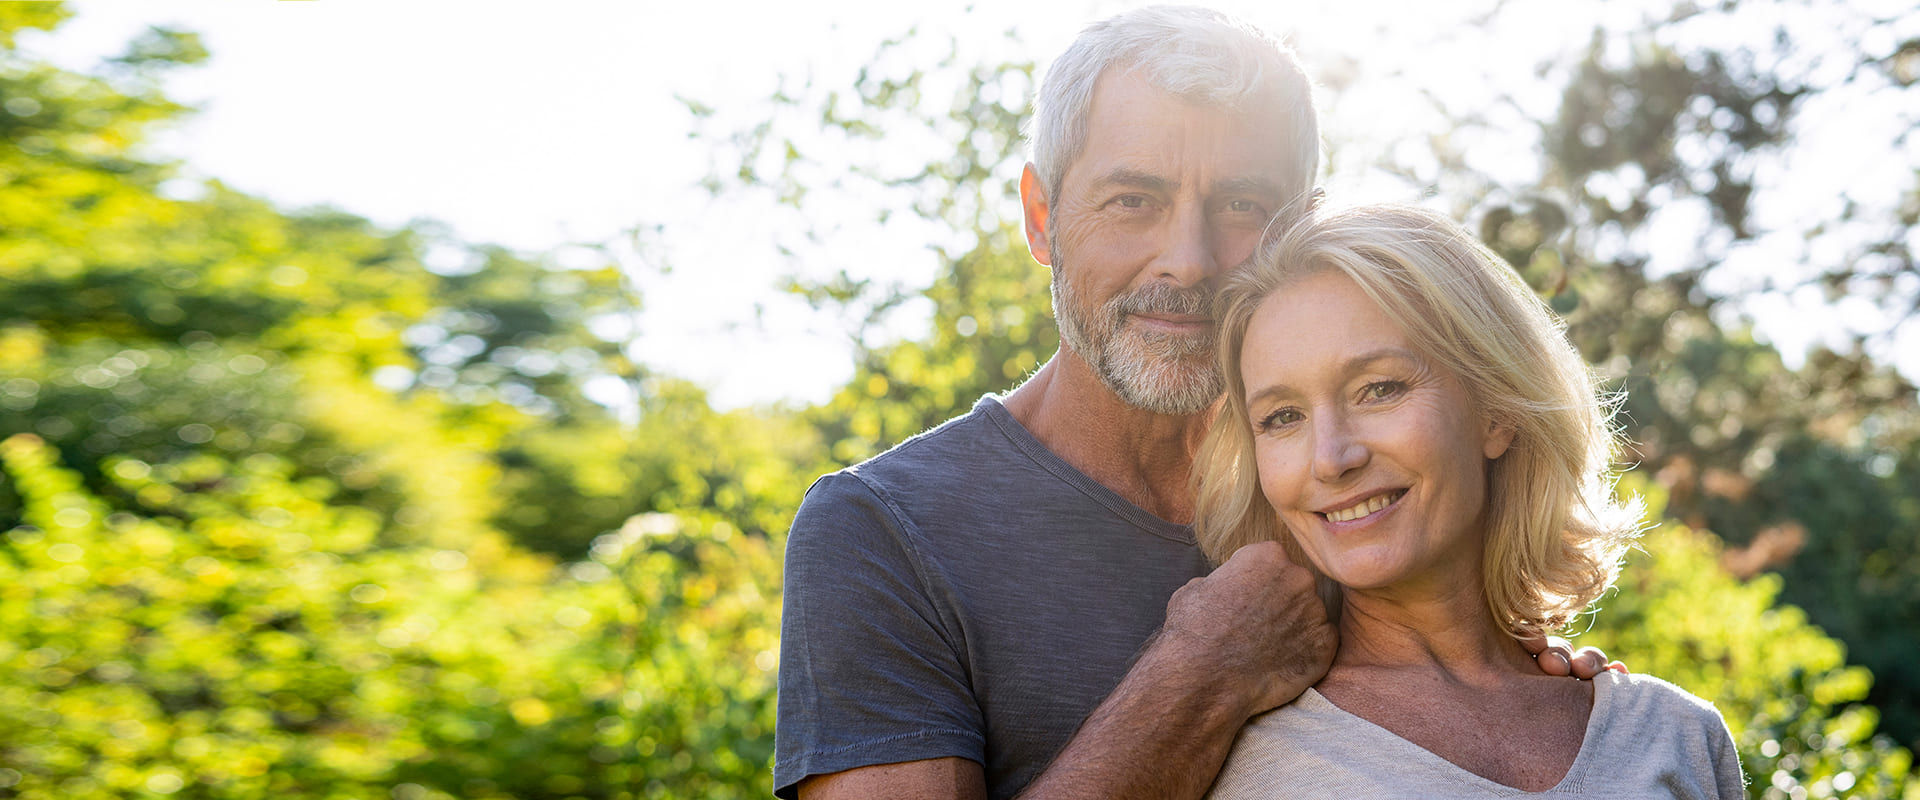 Dating Over 60 – Build meaningful connections with eharmony